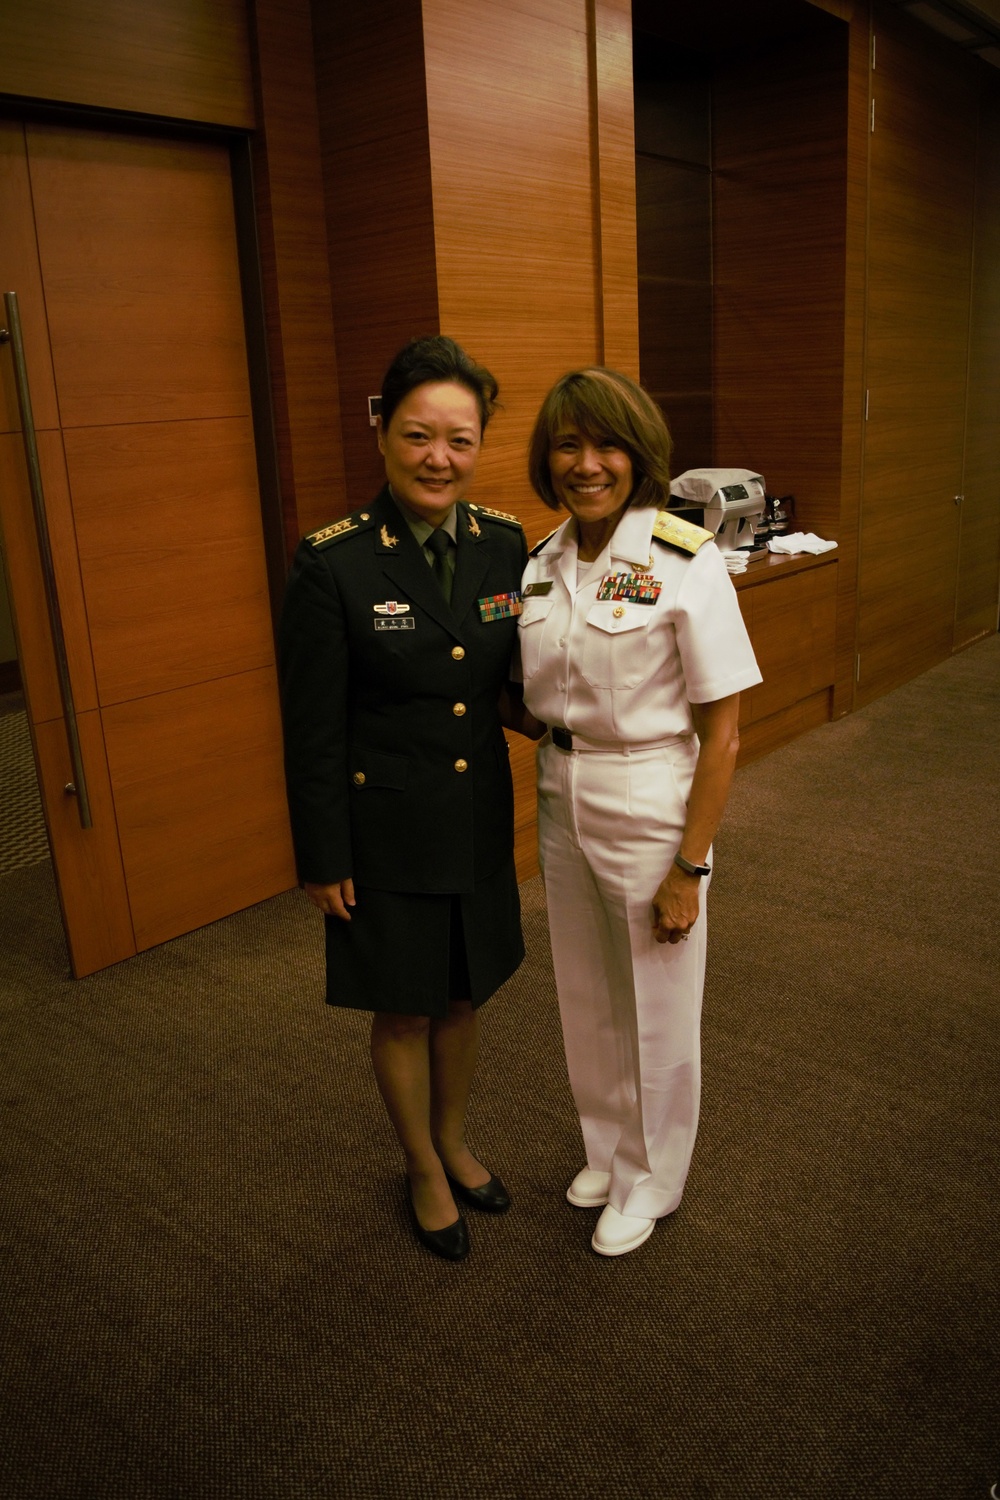 VADM Bono Meets with Chinese Delegation 2